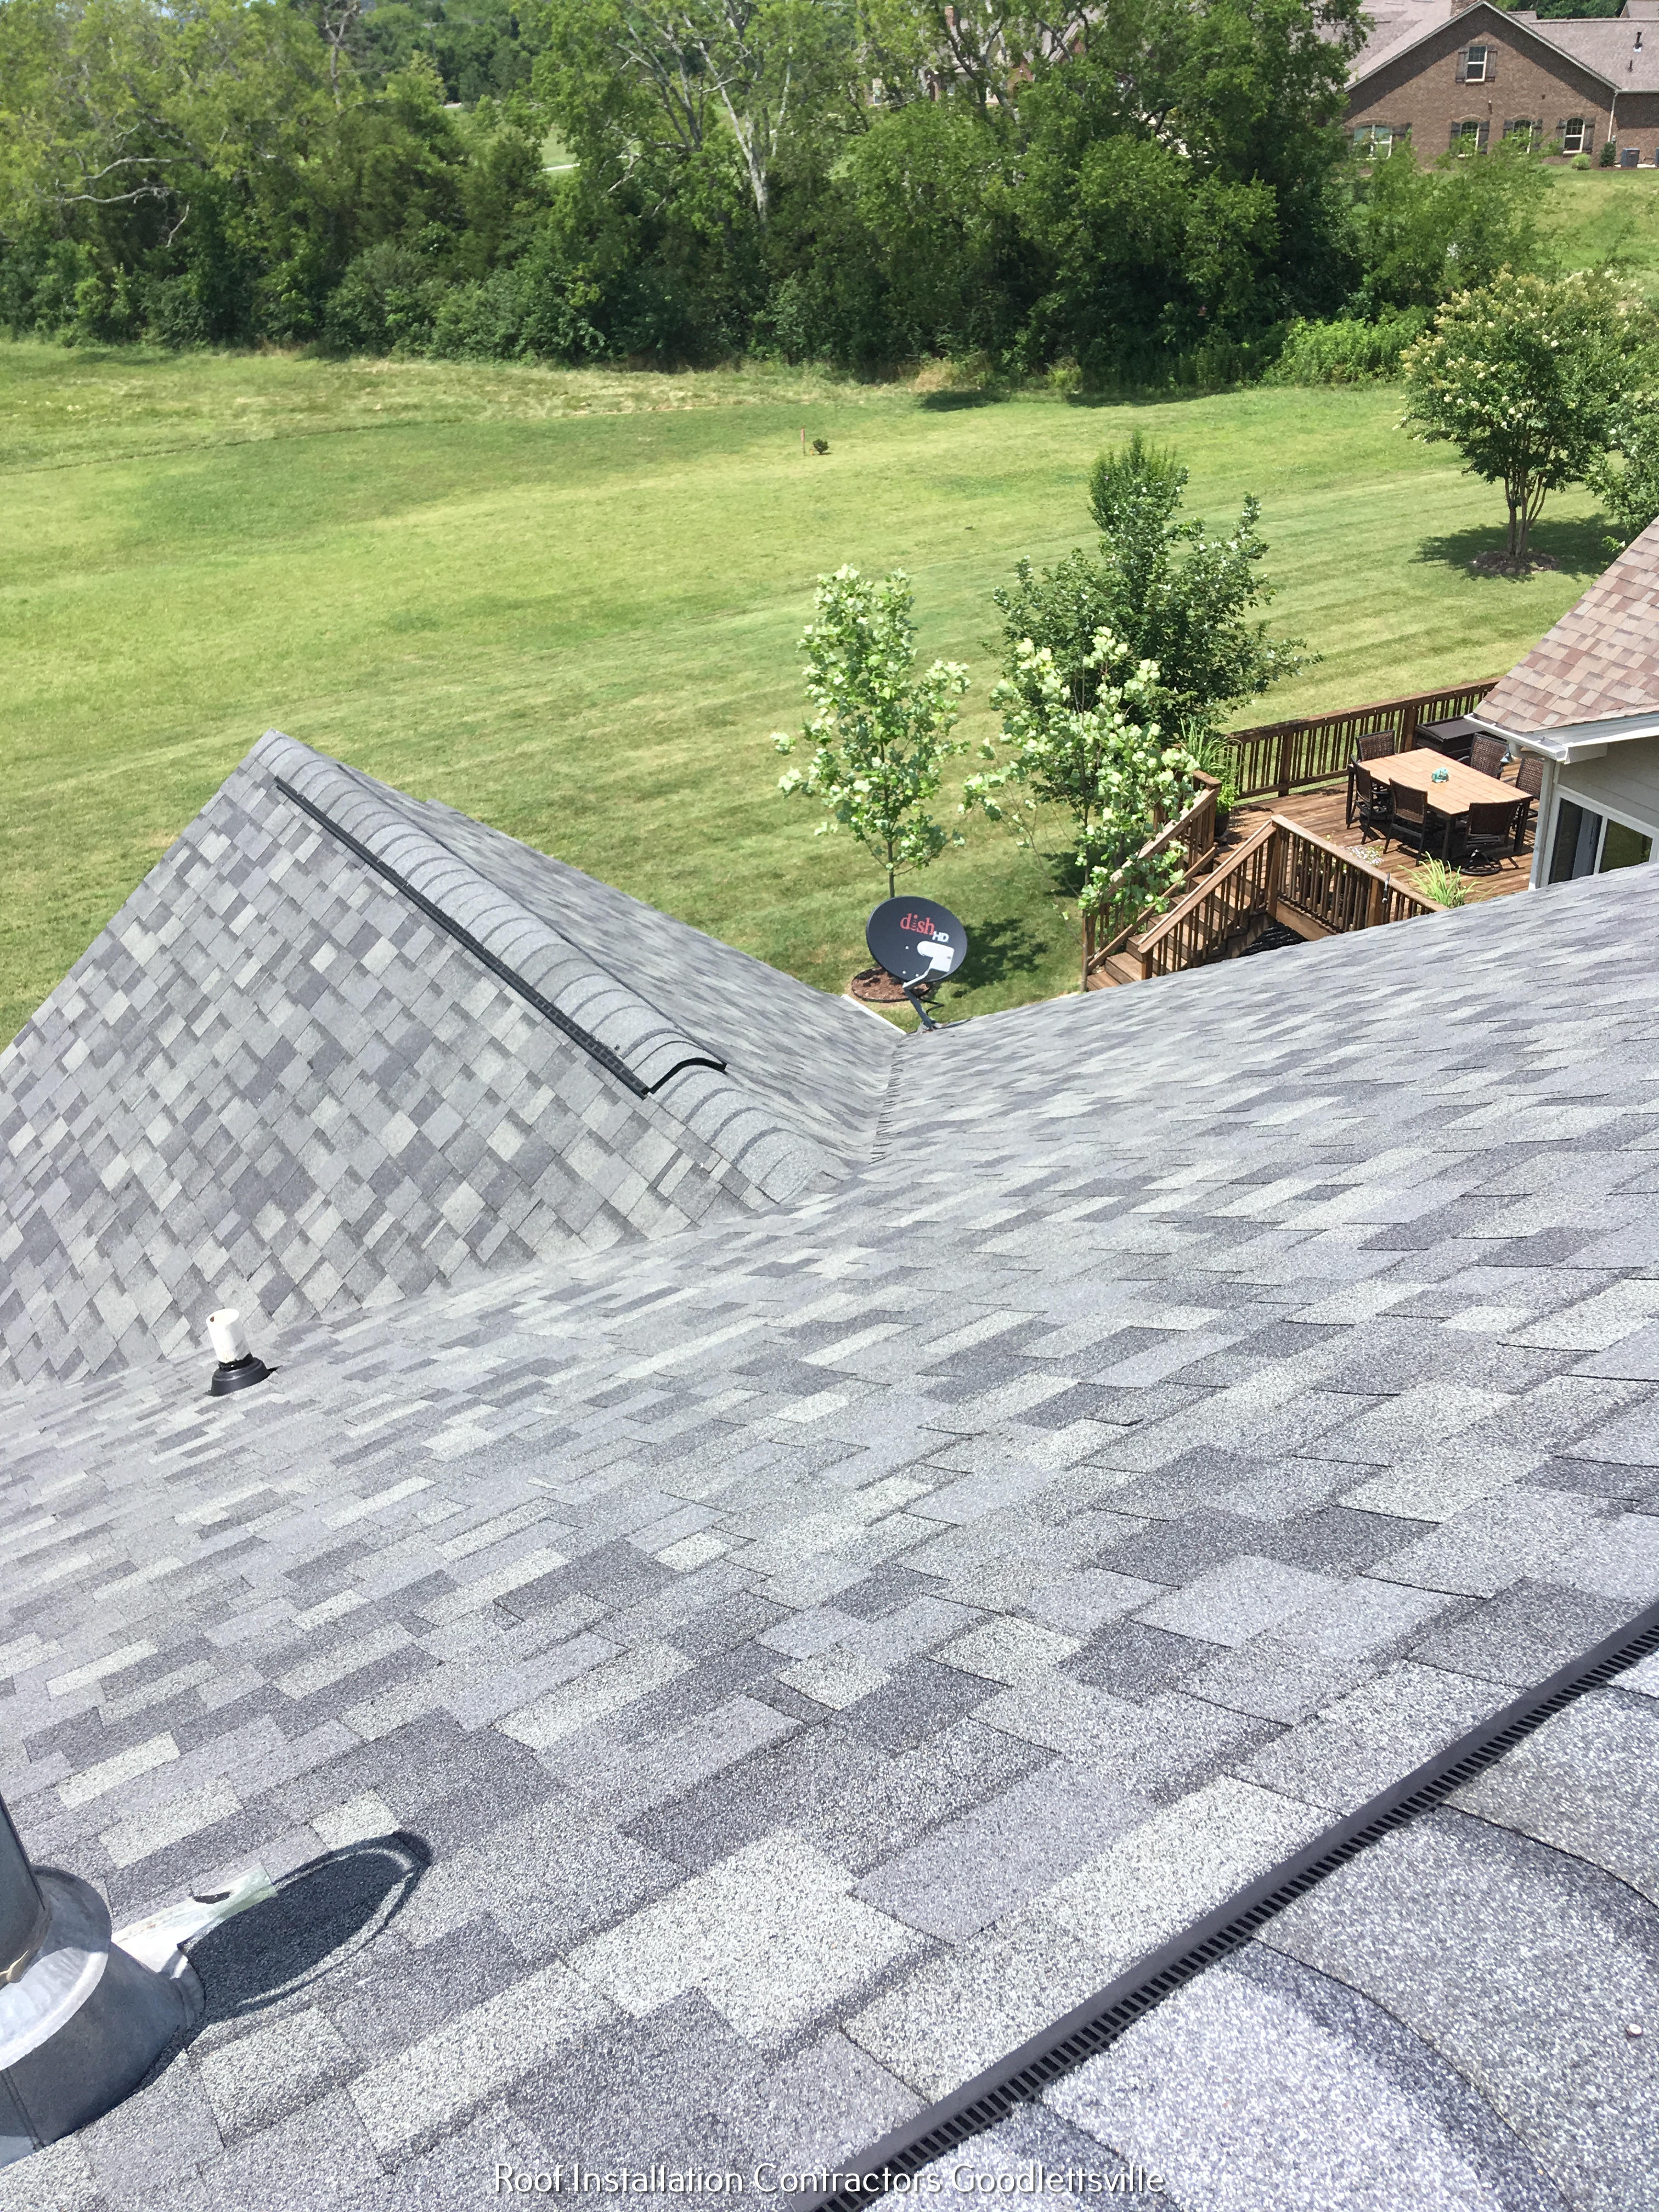 Exceptional Roof Replacement Services in Goodlettsville, TN 